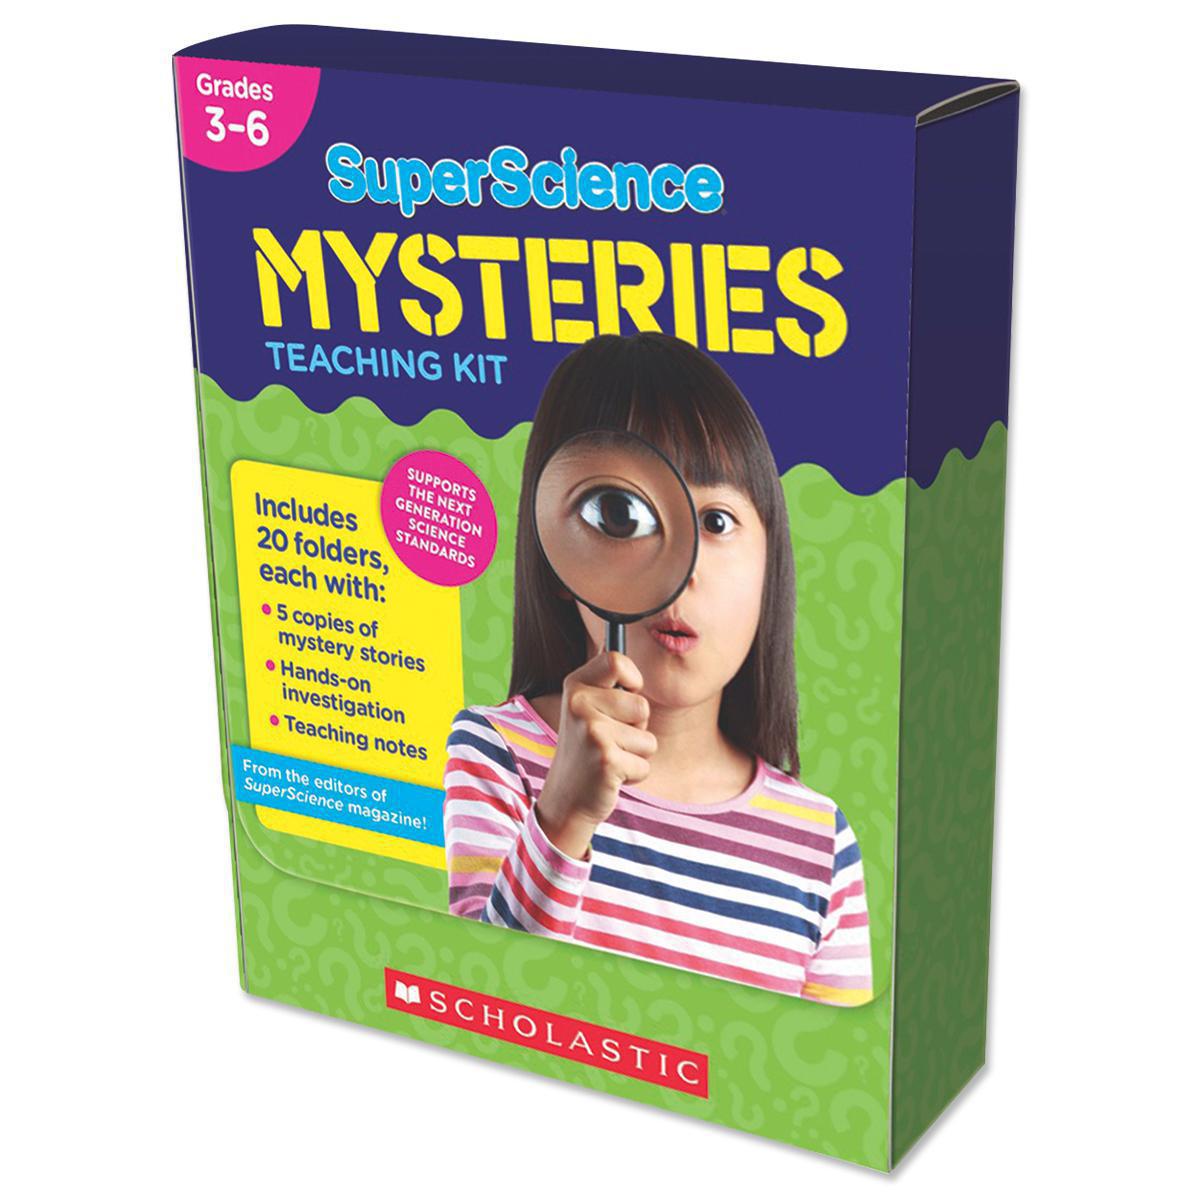  SuperScience Mysteries Teaching Kit 